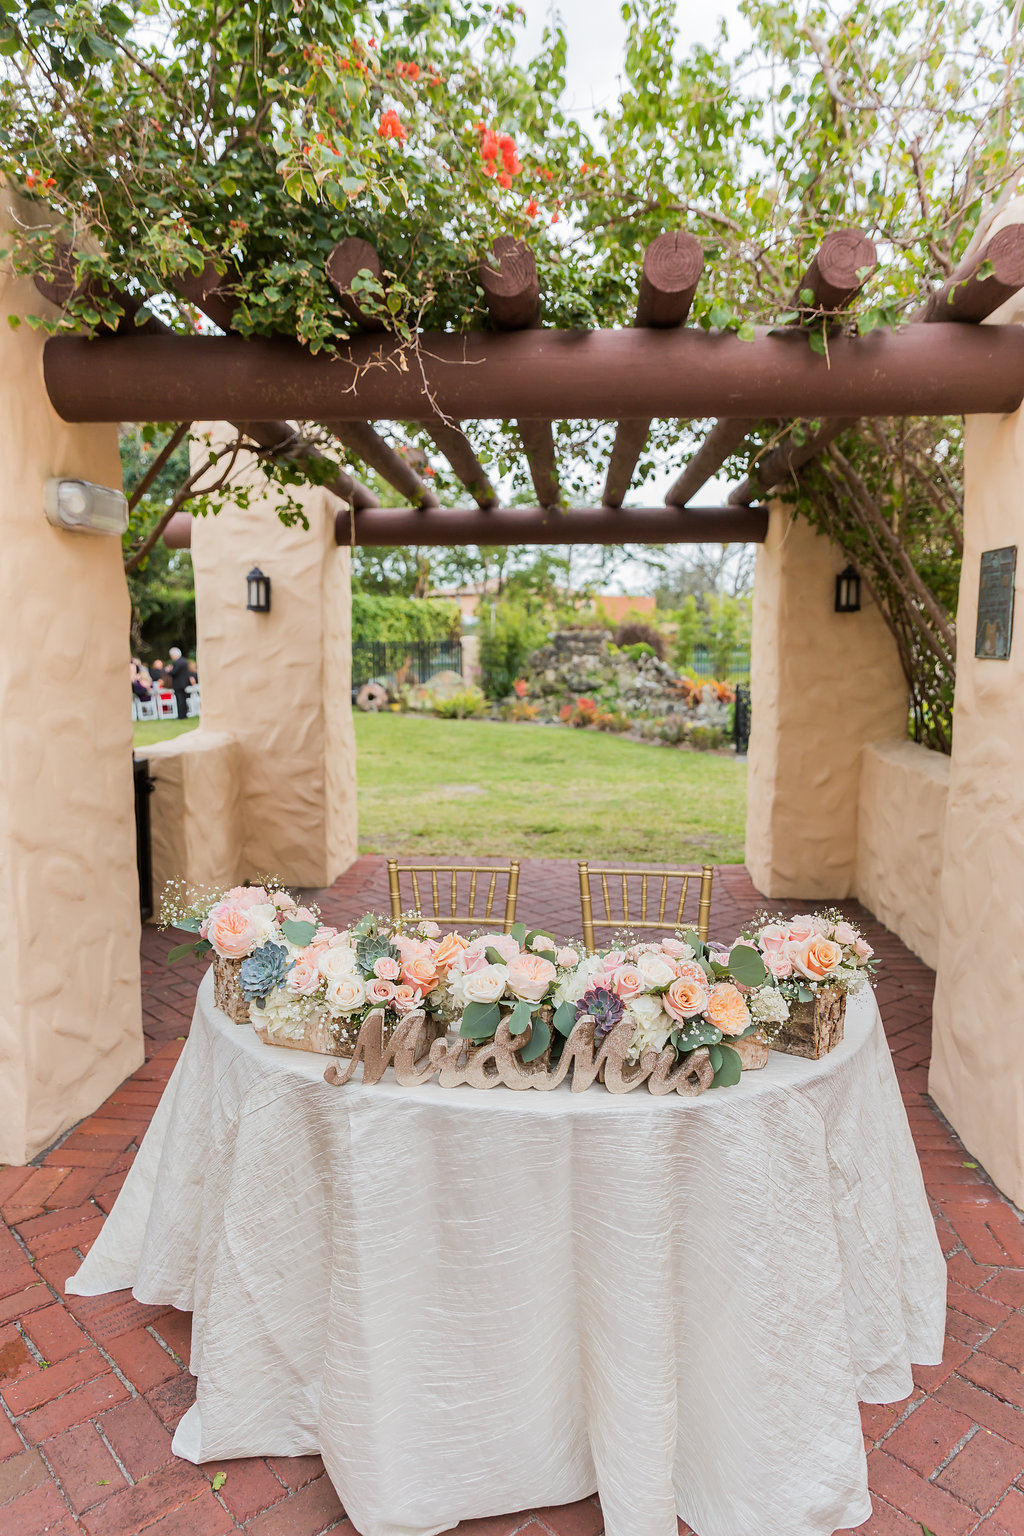 The Curtiss Mansion wedding sweetheart table sat under the wooden canopy. It has a gold Mr. and Mrs. sign and garden centerpiece with ivory fortuny linen